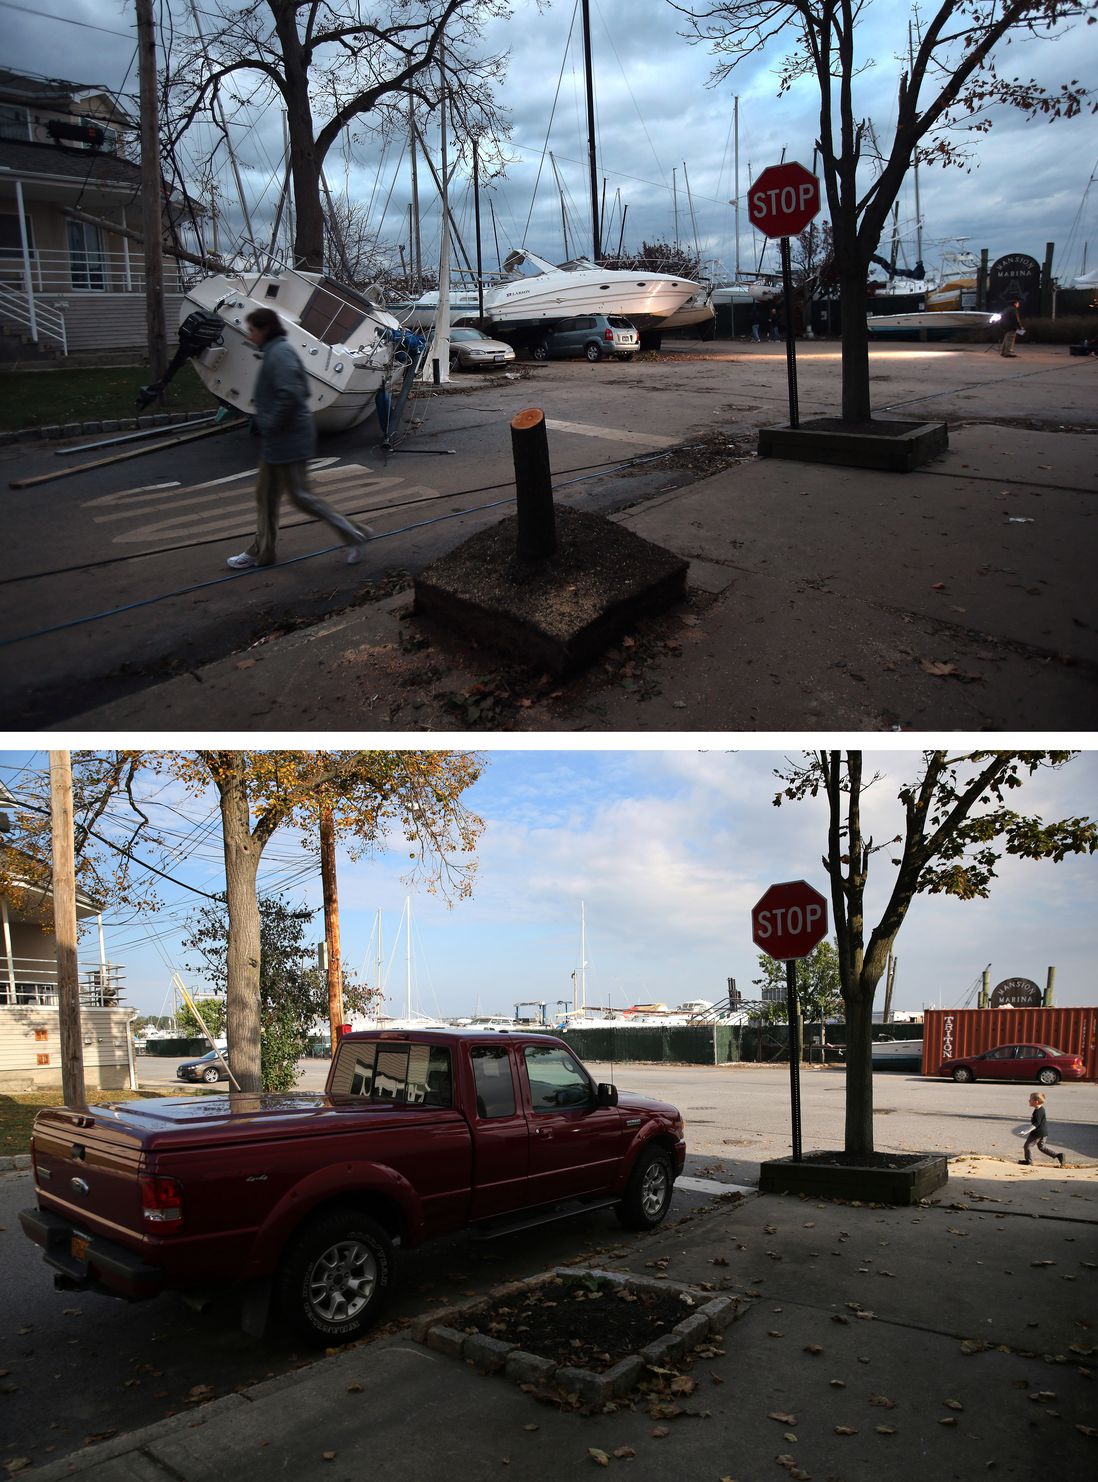 [Top] Boats pushed up by Hurricane Sandy lie against residences near a marina on November 2, 2012 in the Staten Island borough of New York City. [Bottom] A truck sits parked near a marina on October 17, 2013.